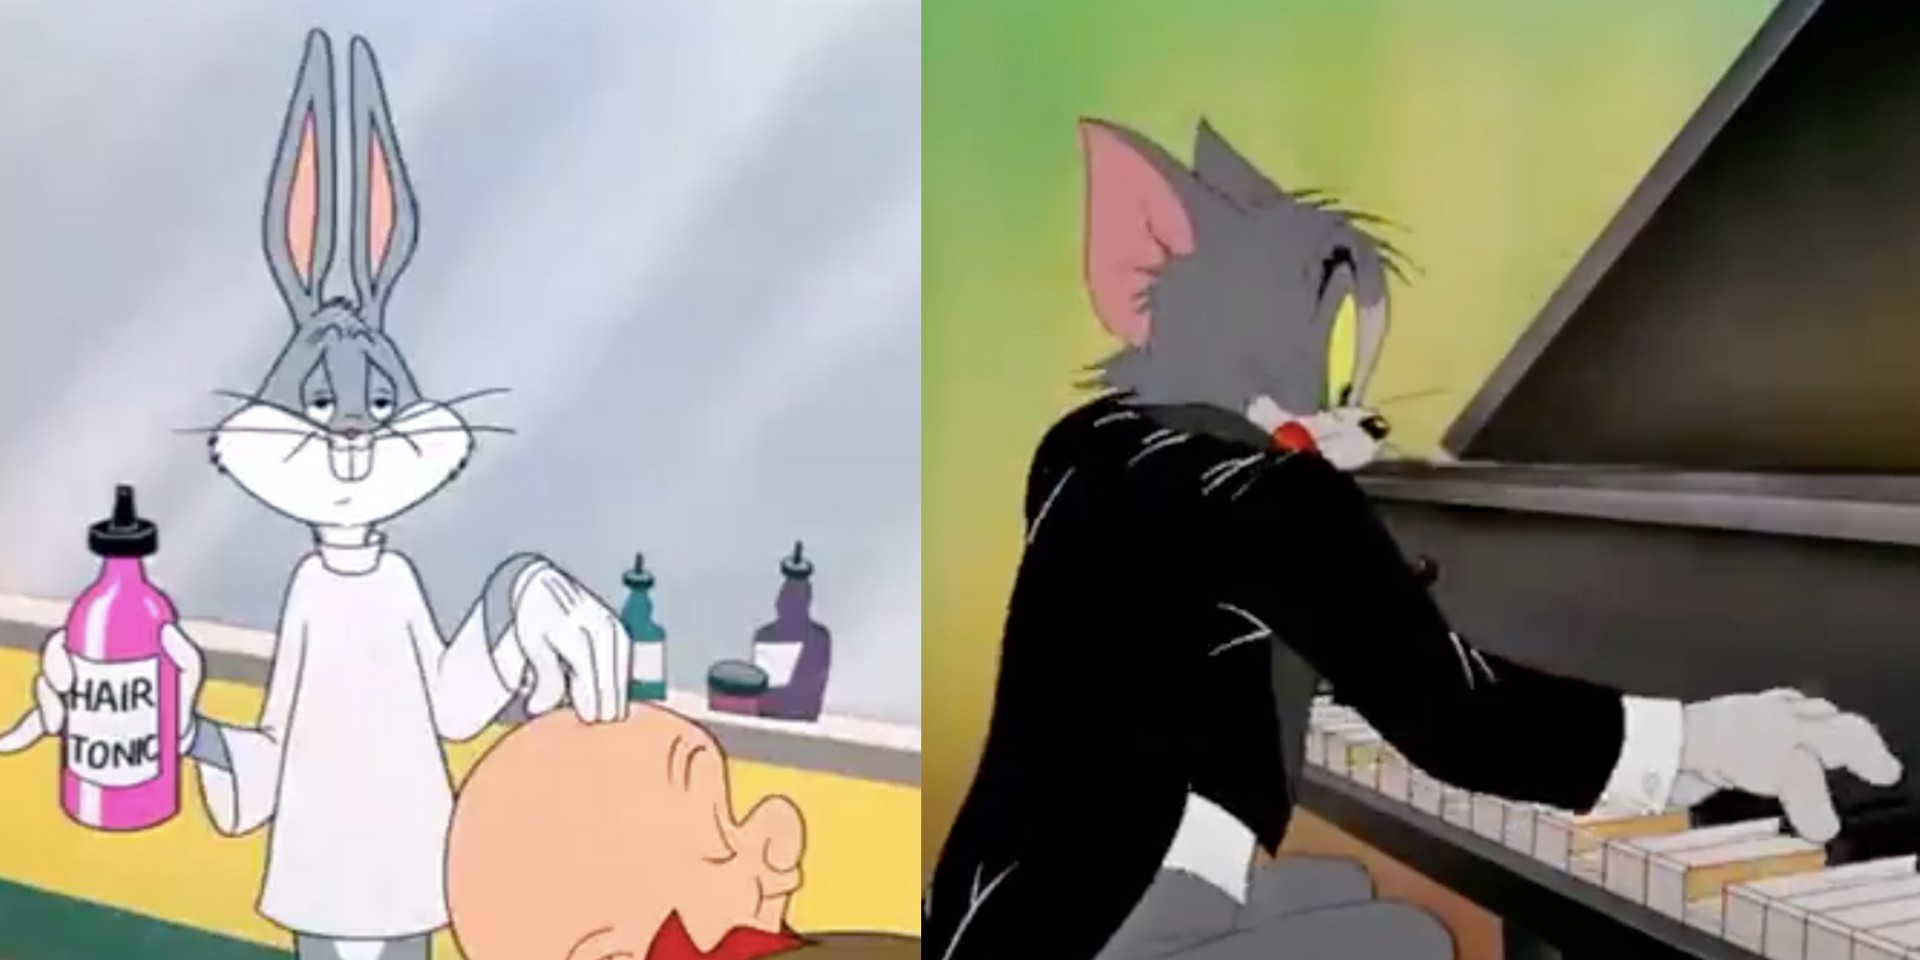 Classical compositions in cartoons - cartoonist Vincent Alexander identifies iconic pieces in Looney Tunes, Tom and Jerry, and more